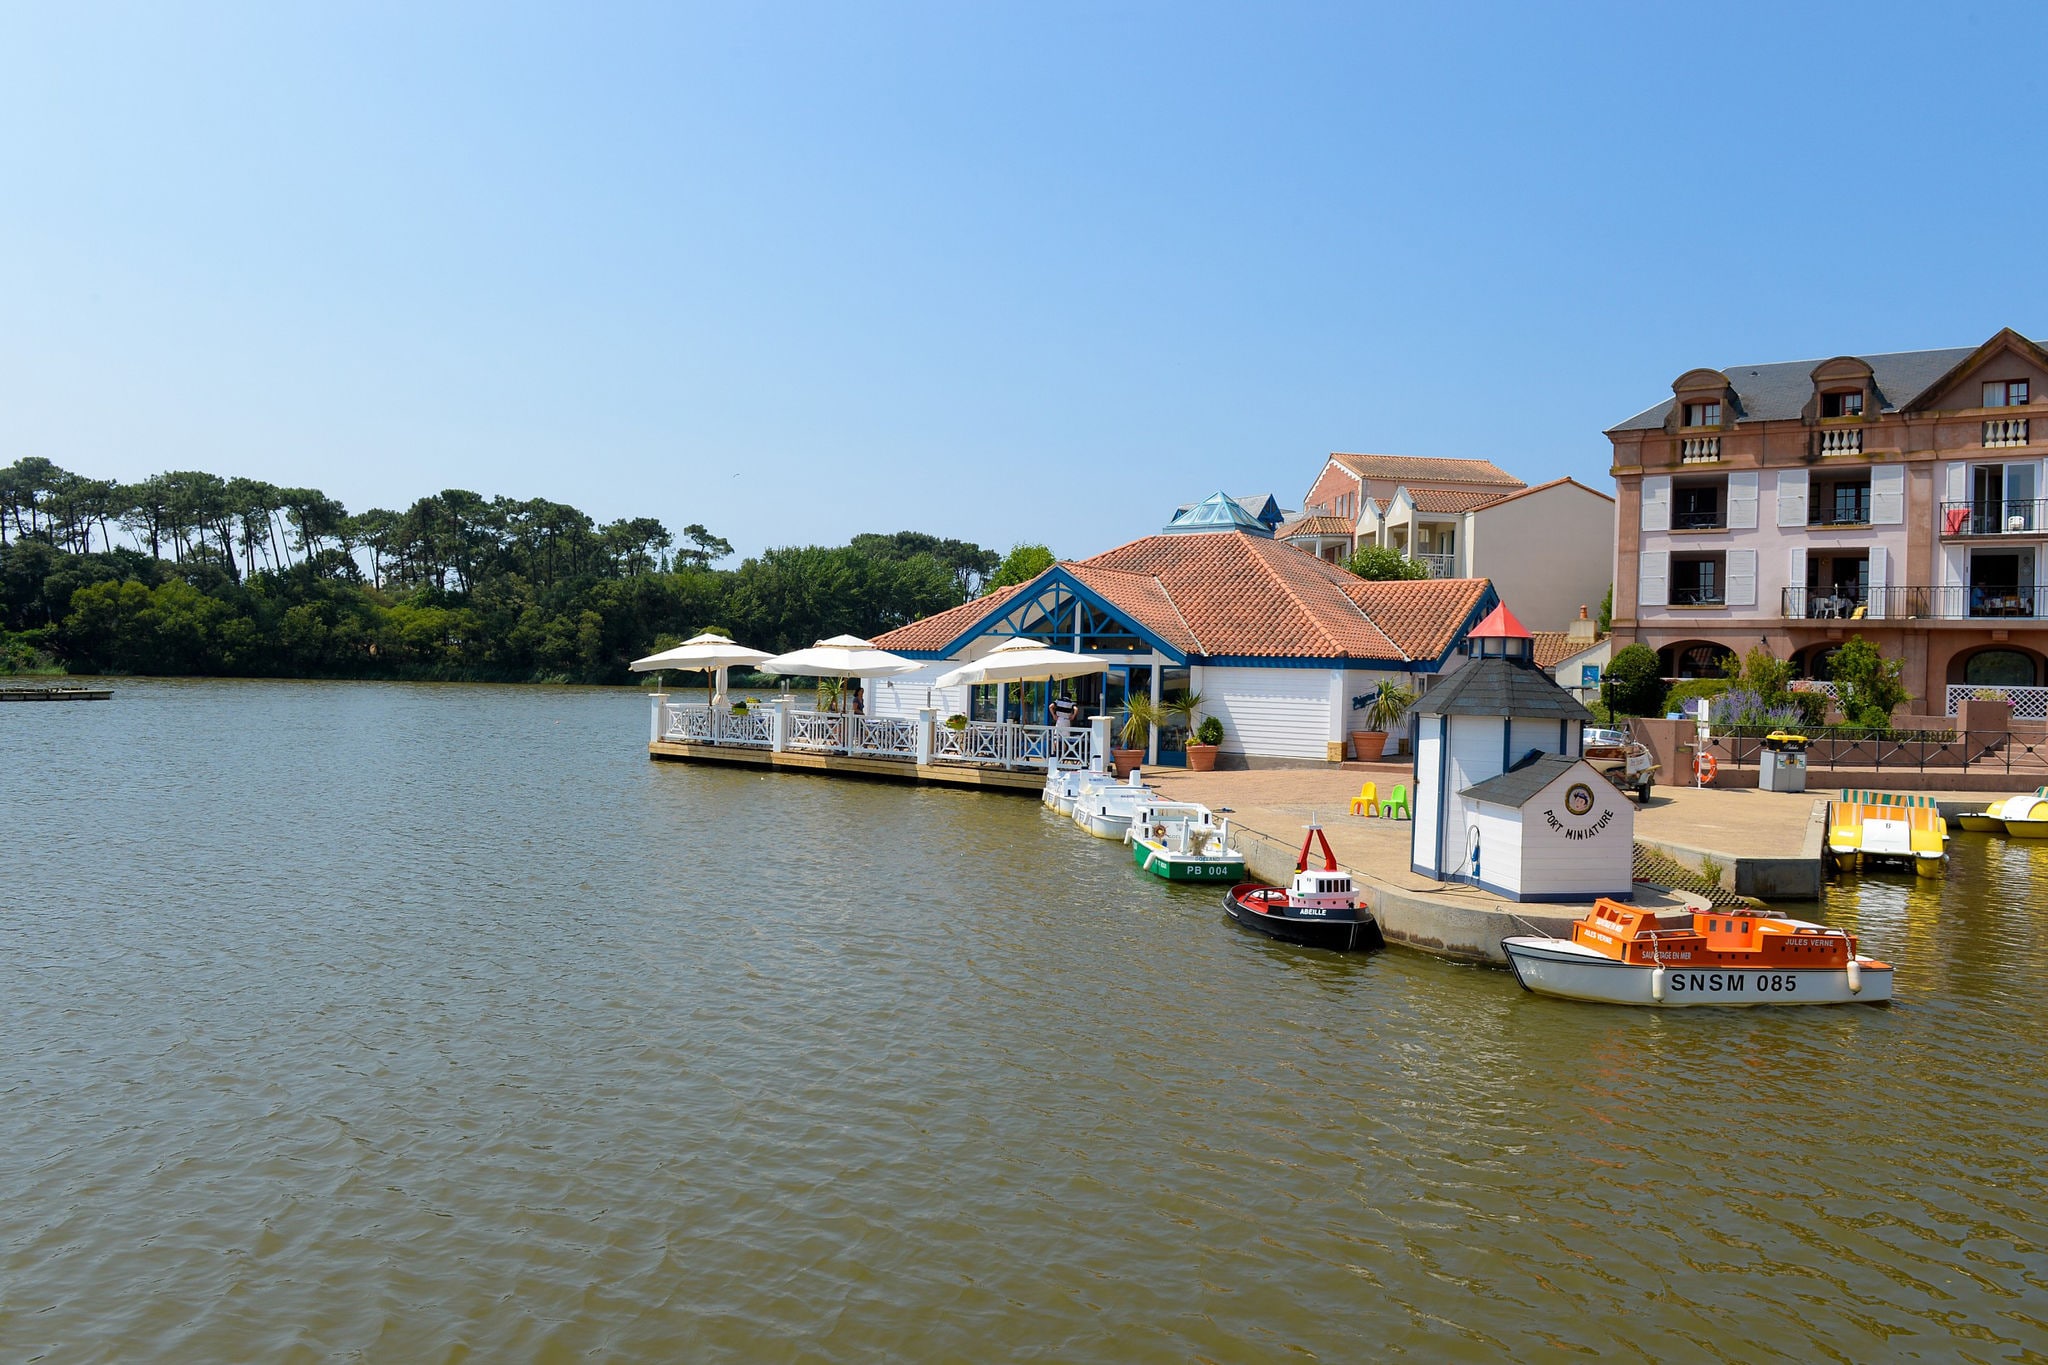 Stylish apartment located near a lake in the Vendée